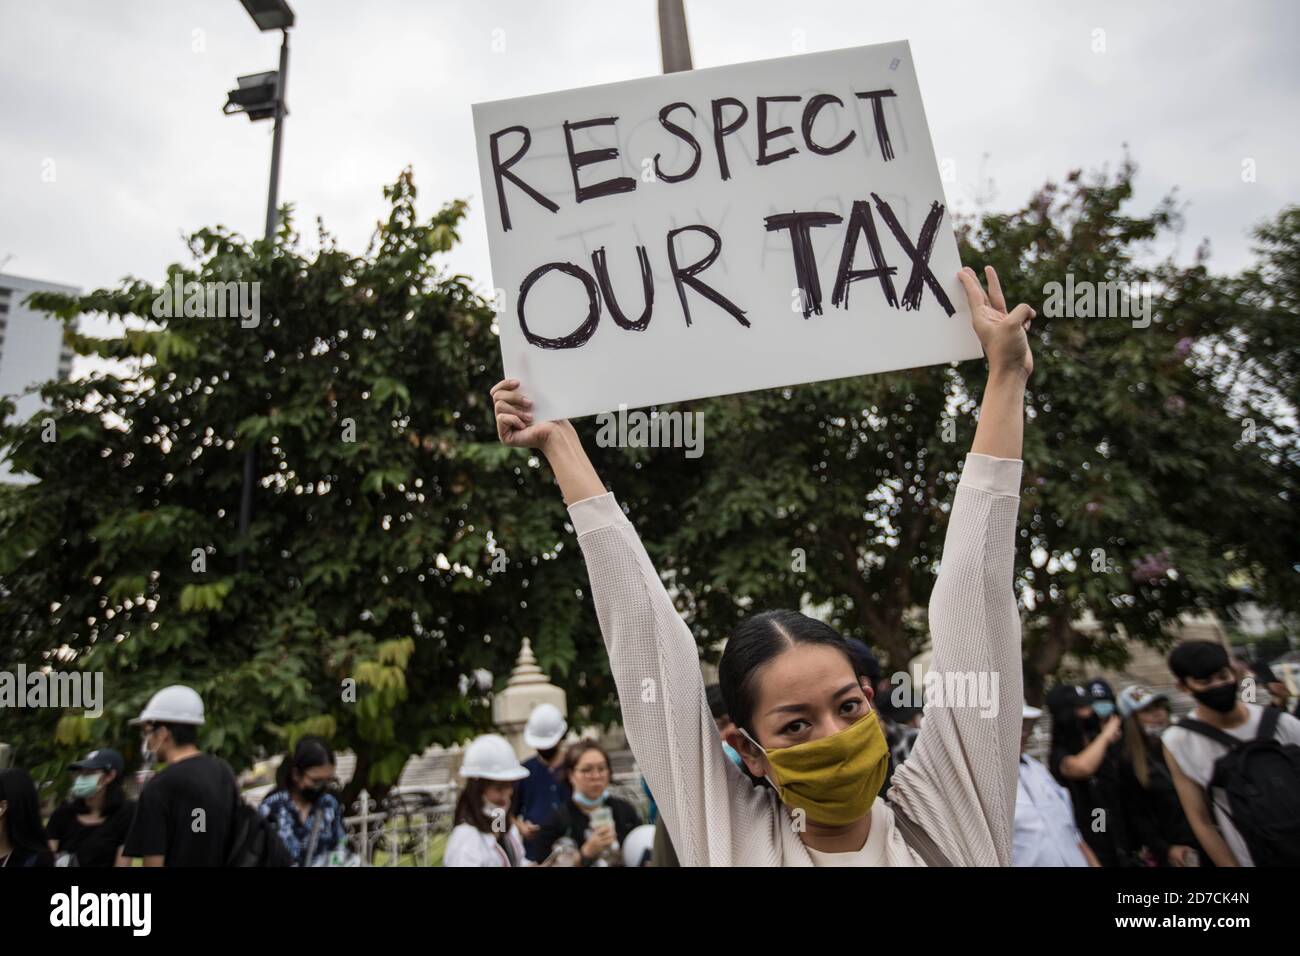 A pro-democracy protester holds a plaacrd saying 'Respect Our Tax' during an anti-government demonstration in the Thai Capital. Thousands of pro-democracy protesters took the streets at Victory Monument demanding the resignation of Thailand Prime Minister and the reform of the monarchy for the seventh day after a ‘severe state of emergency' declared by Prime Minister Prayut Chan-o-cha. The protesters marched from Victory Monument to Government House and delivered a letter to Prime Minister Prayut Chan-o-cha asking him to resign before 3 days. The protest ended peacefully. Stock Photo